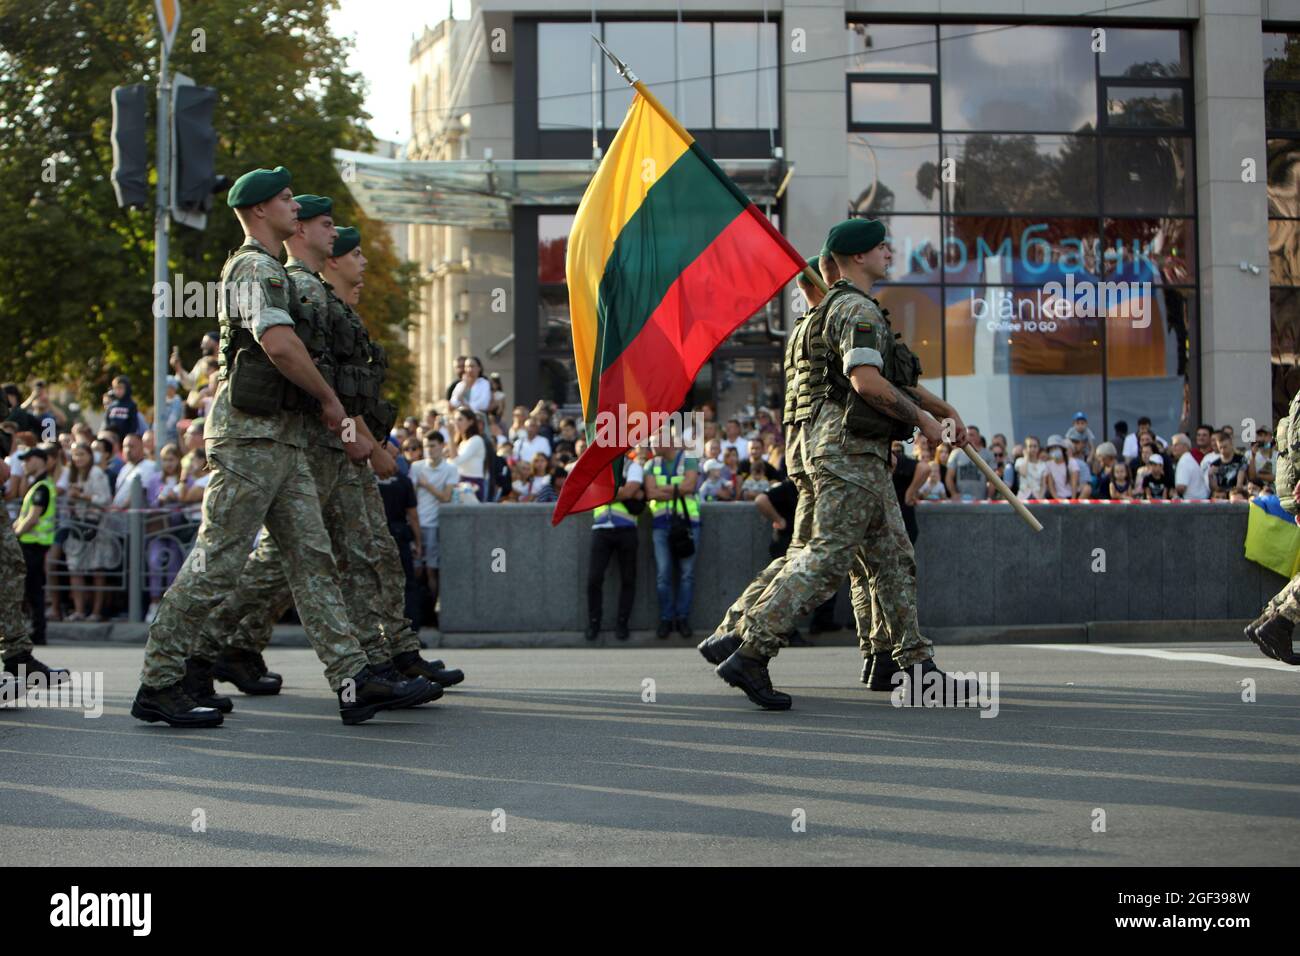 Non Exclusive: KYIV, UKRAINE - AUGUST 22, 2021 - Lithuanian soldiers partake in the rehearsal of the Kyiv Independence Day Parade on Khreshchatyk Stre Stock Photo